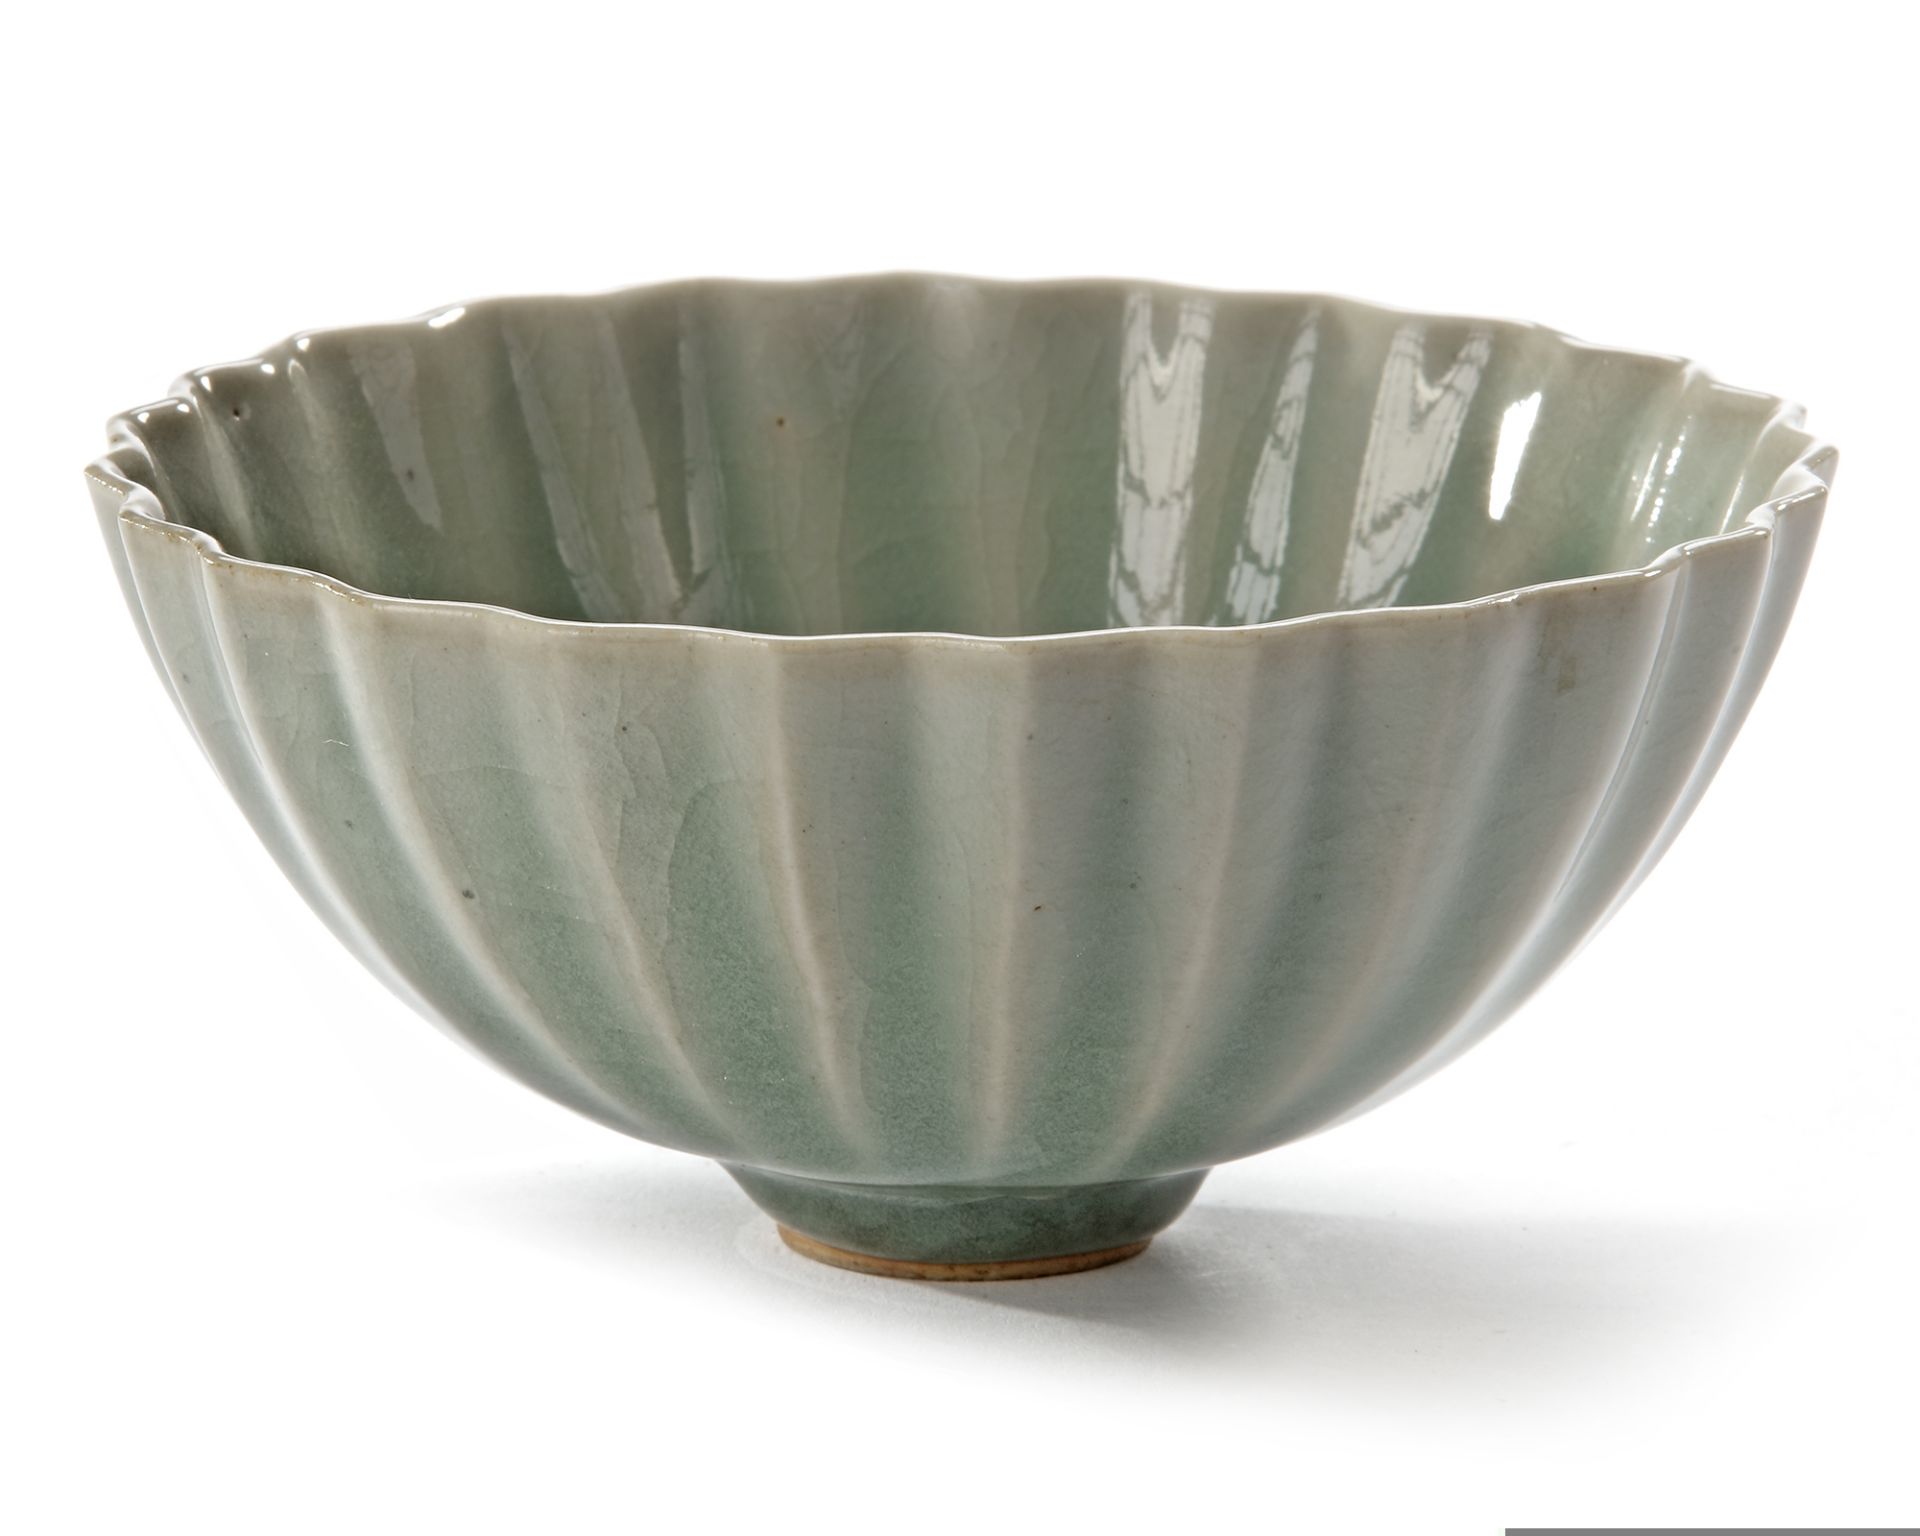 TWO CHINESE LONGQUAN PETAL-LOBED BOWLS, SONG DYNASTY (960-1279) - Image 2 of 6